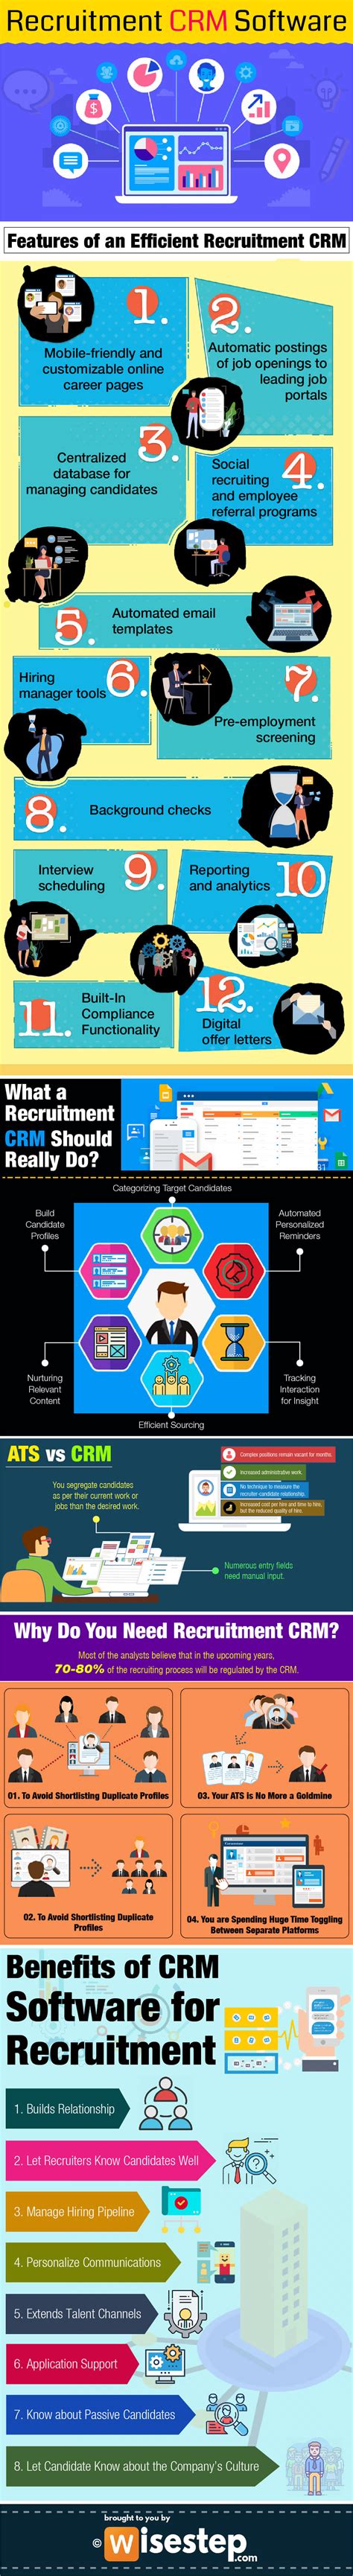 Revolutionizing Recruitment with CRM Software